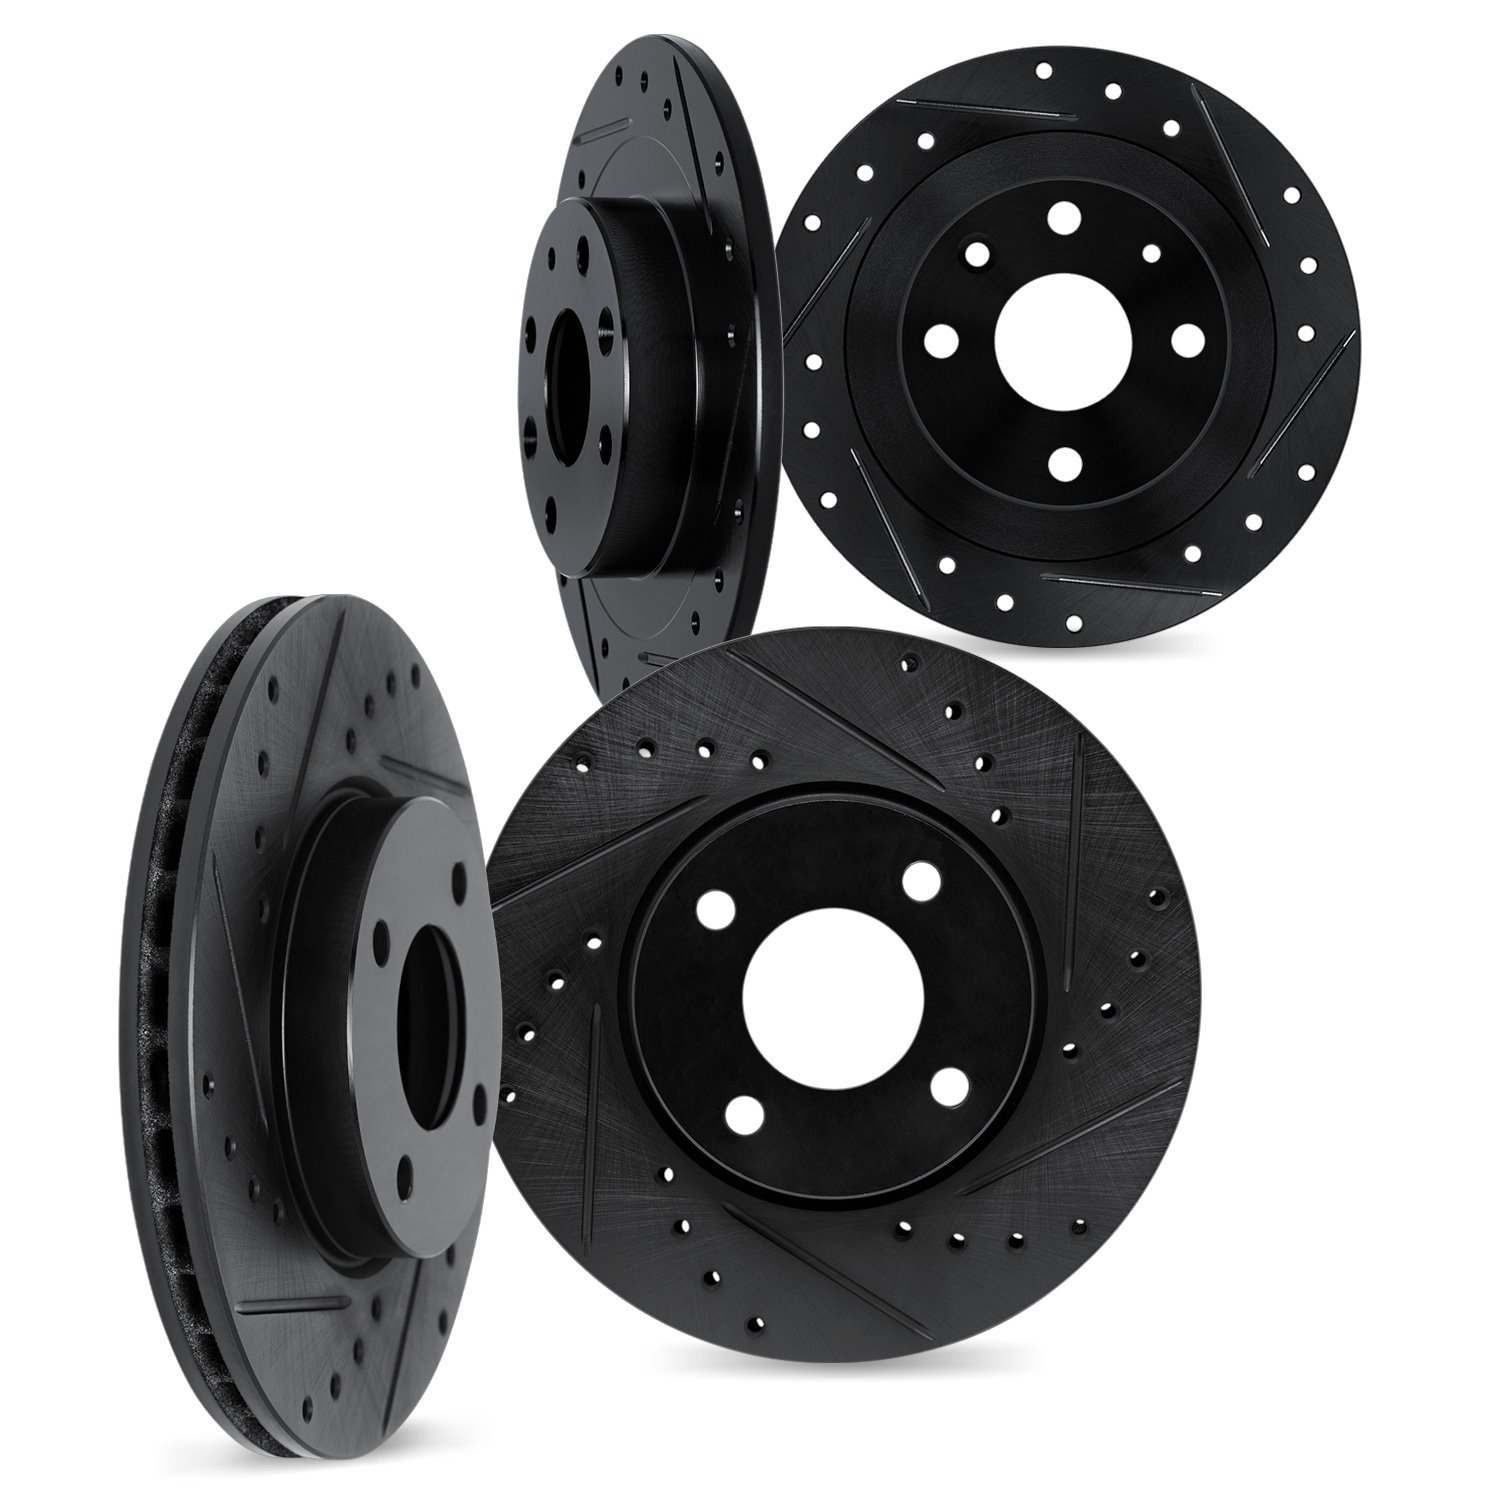 8004-67096 Drilled/Slotted Brake Rotors [Black], 1991-1994 Infiniti/Nissan, Position: Front and Rear